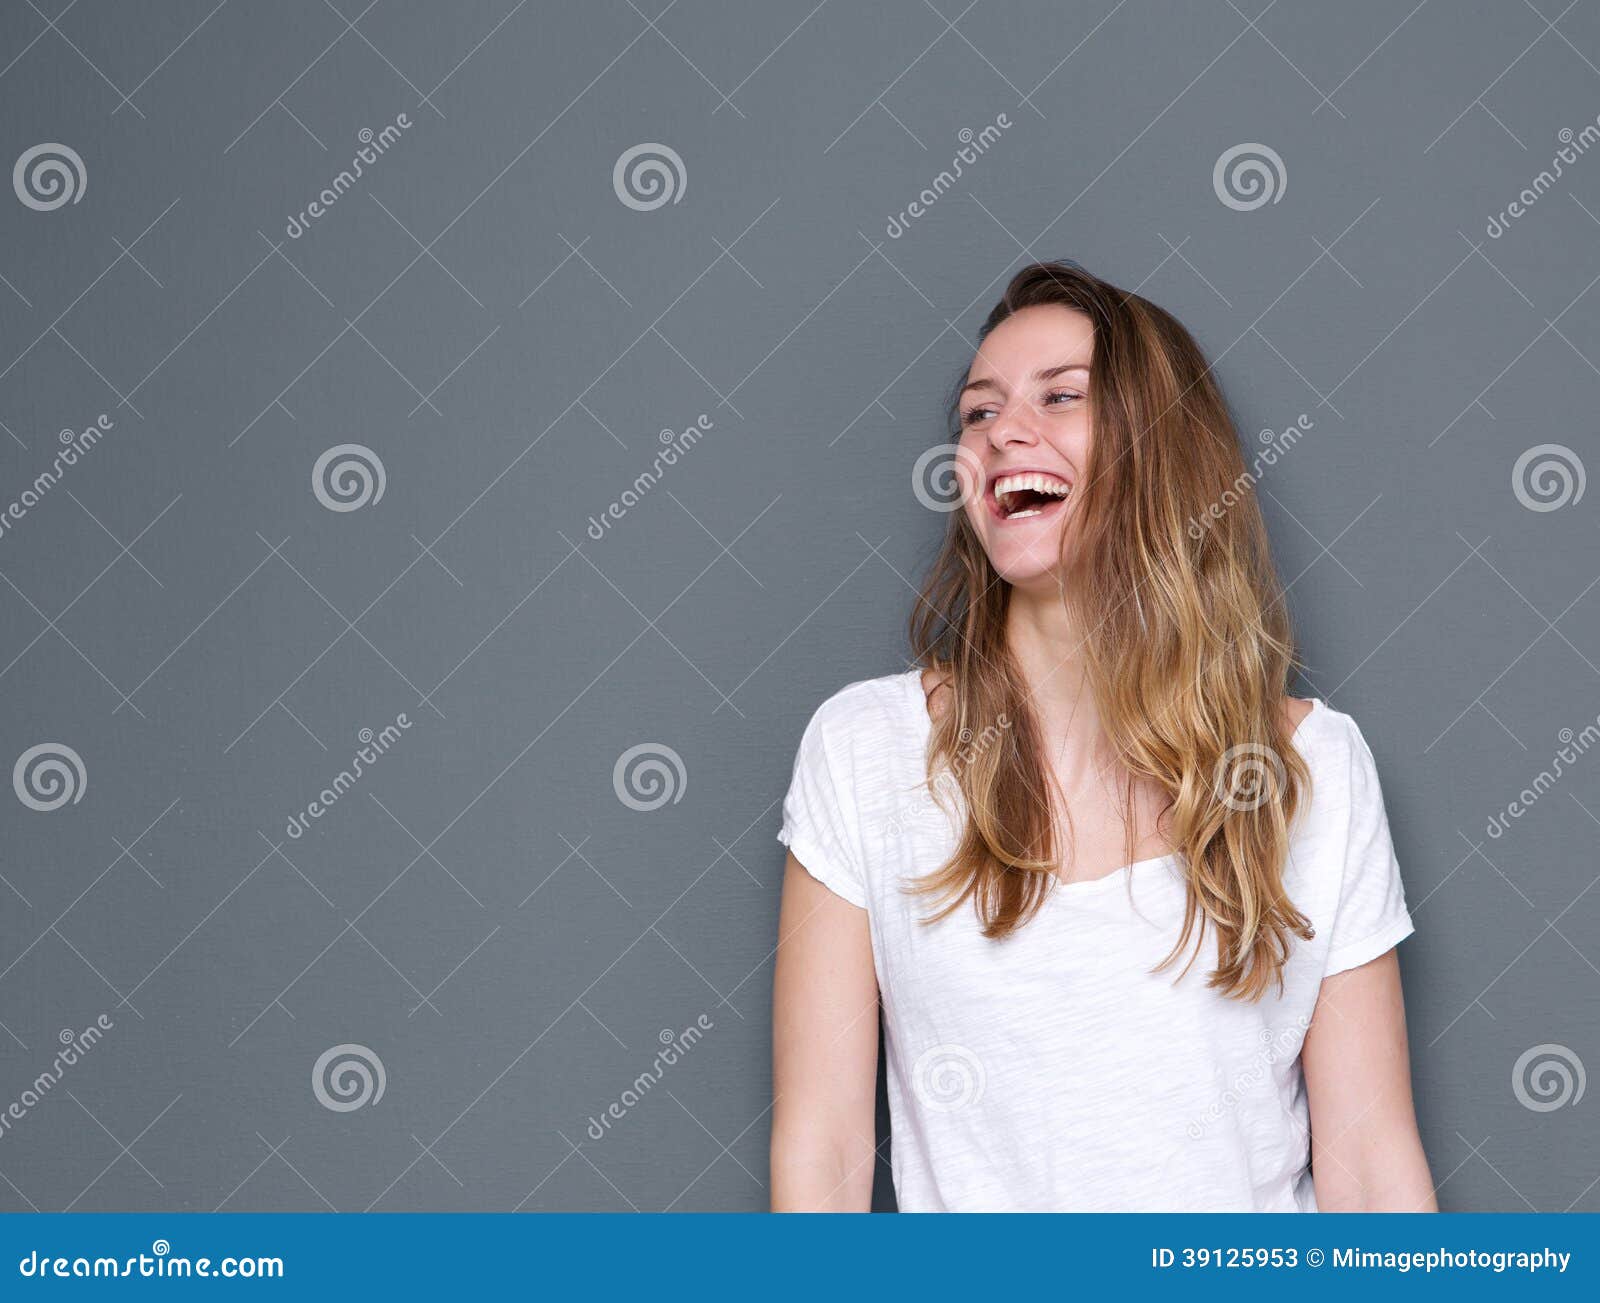 woman laughing with joy